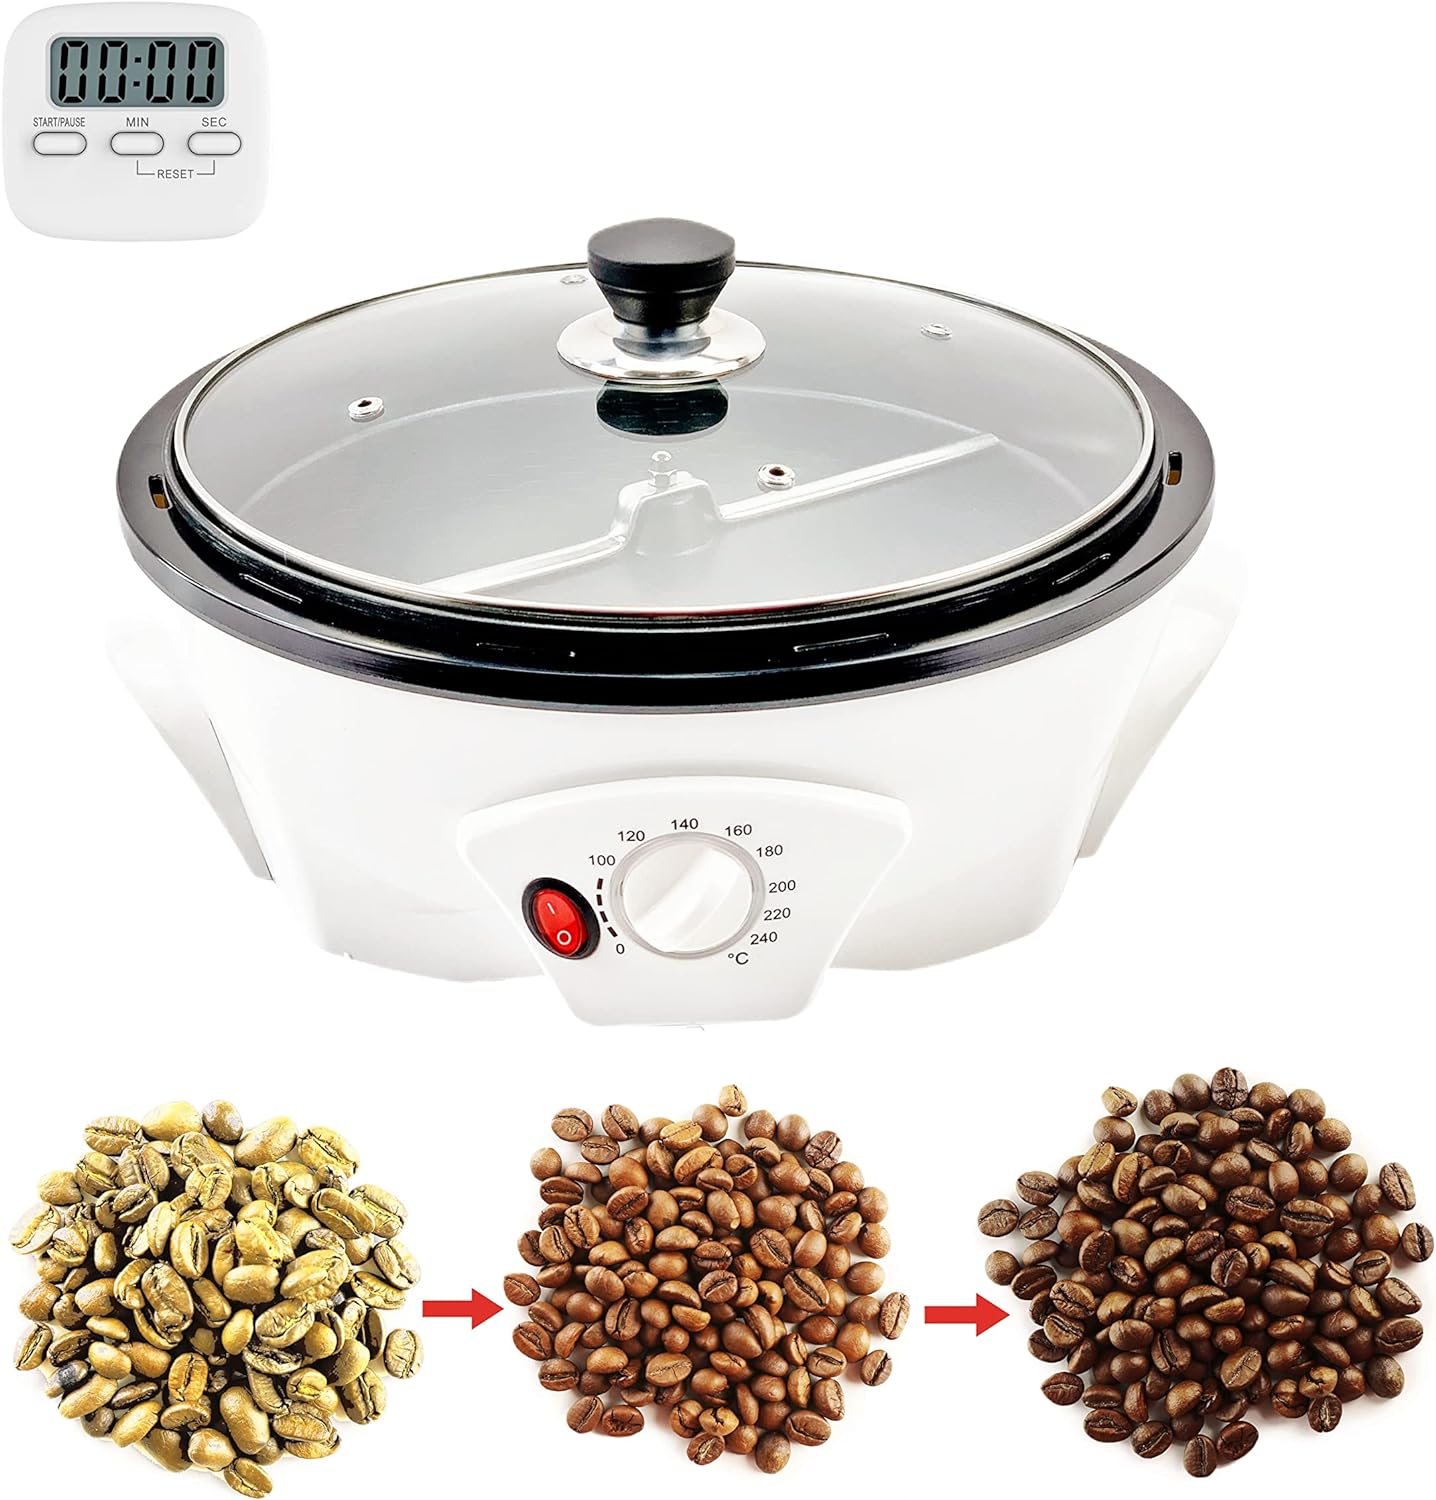 Giveroo 500G Coffee Bean Roaster Household Coffee Roasters Machine With Timer Electric Coffee Beans Roaster 0-240℃ Non-Stick For Cafe Shop Home Use. 110V